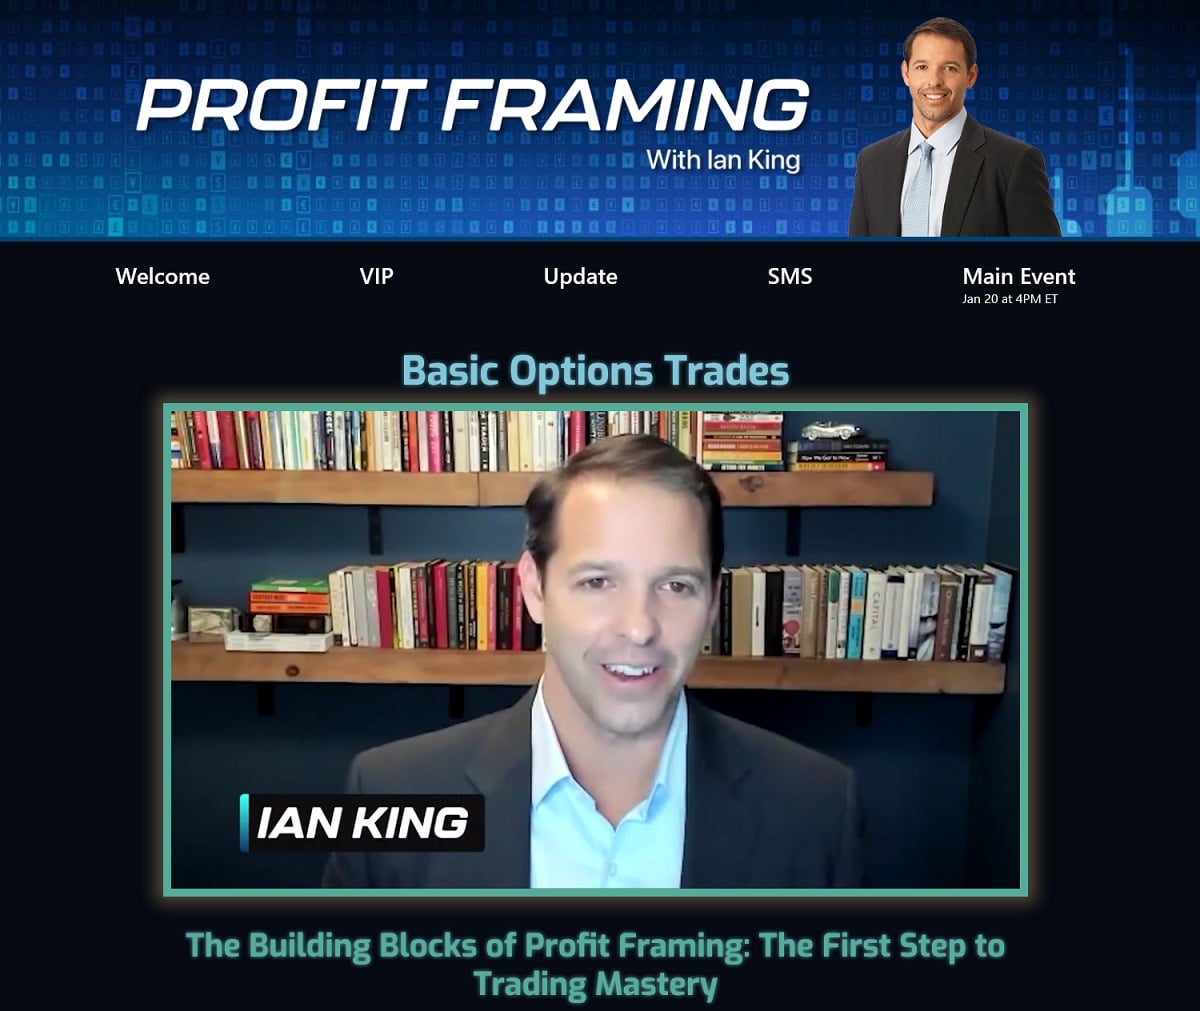 Profit Framing Event With Ian King